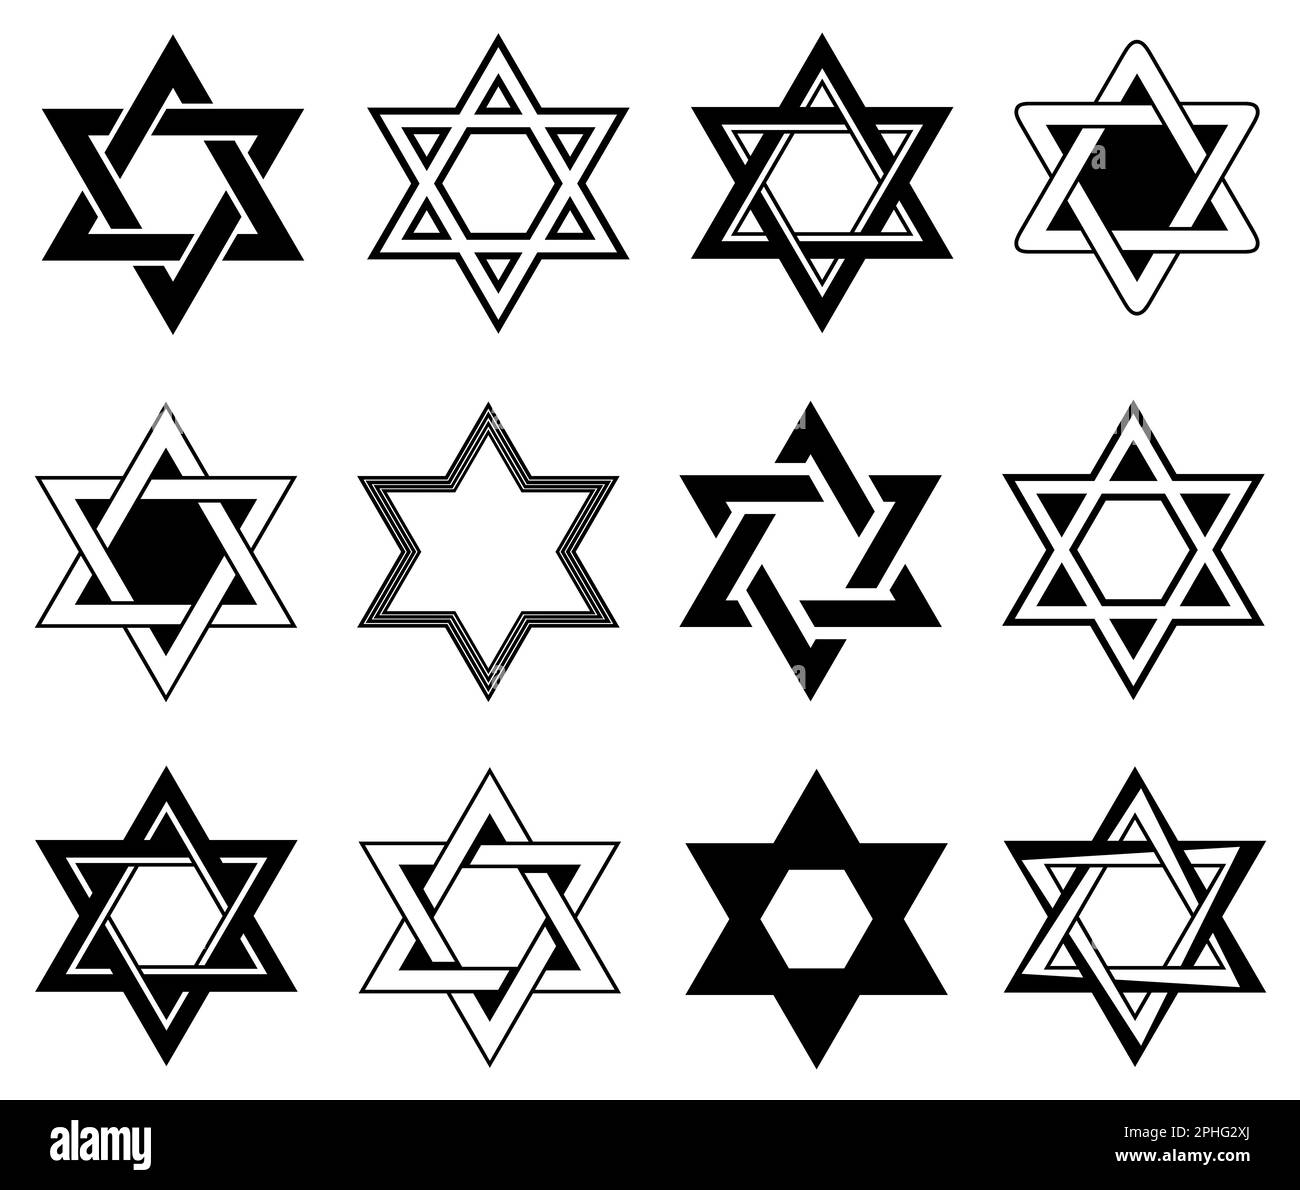 Collage of different Star of David illustrations isolated on white Stock Photo